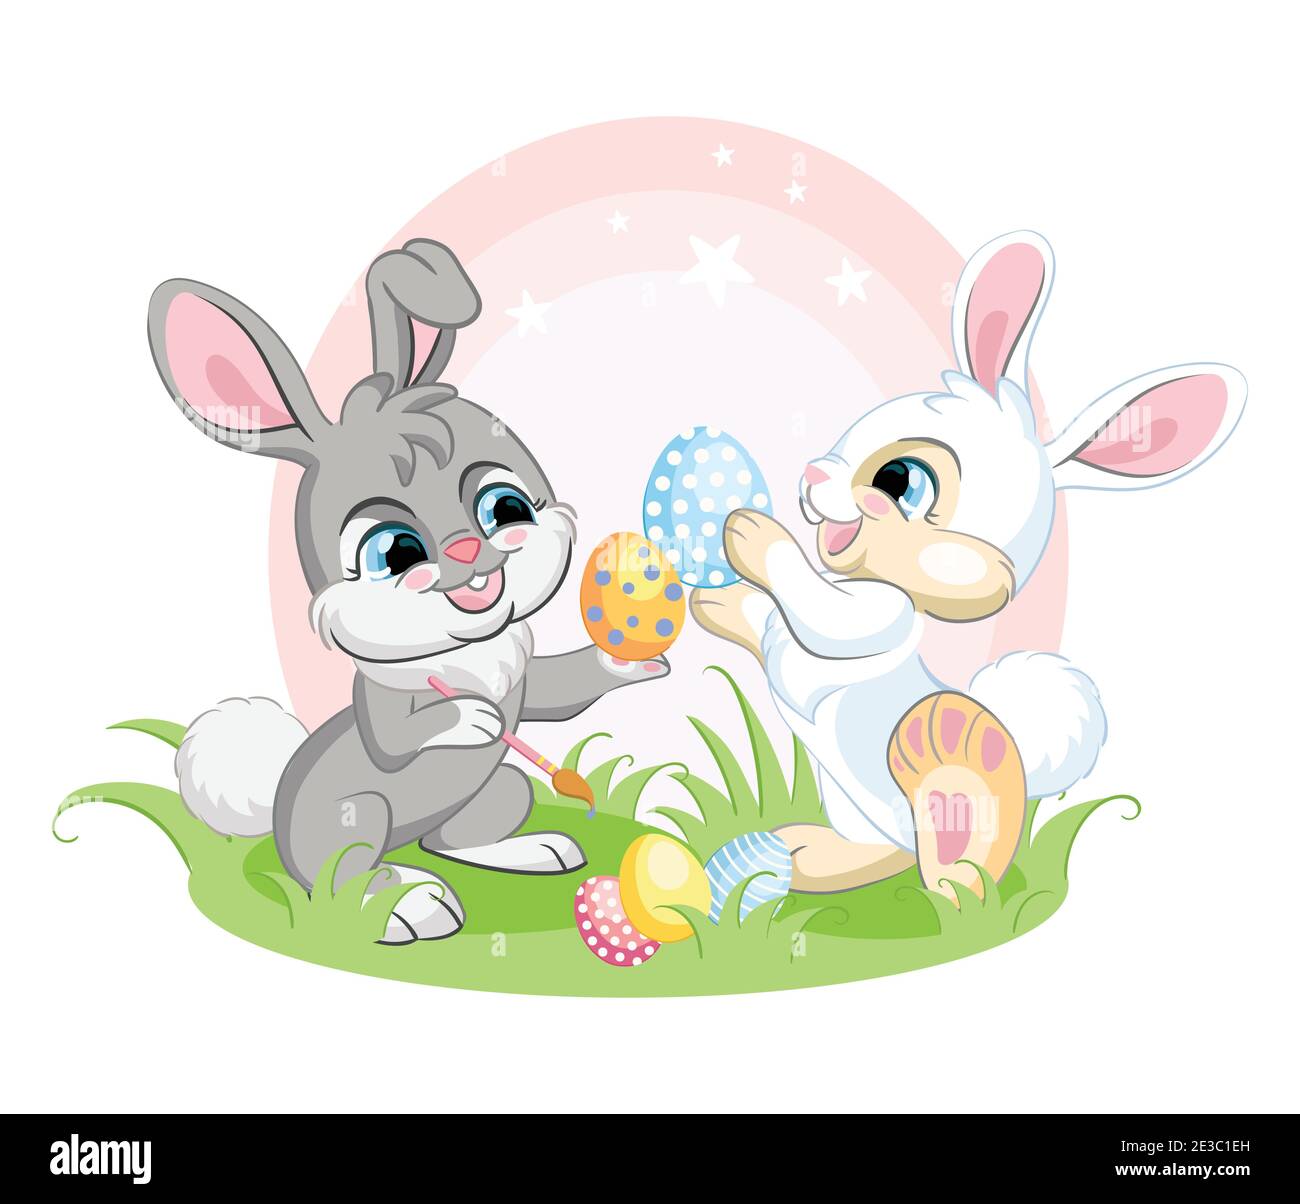 Cute white and gray bunnies paints Easter eggs. Colorful illustration isolated on white background. Cartoon character rabbit easter concept for print, Stock Vector